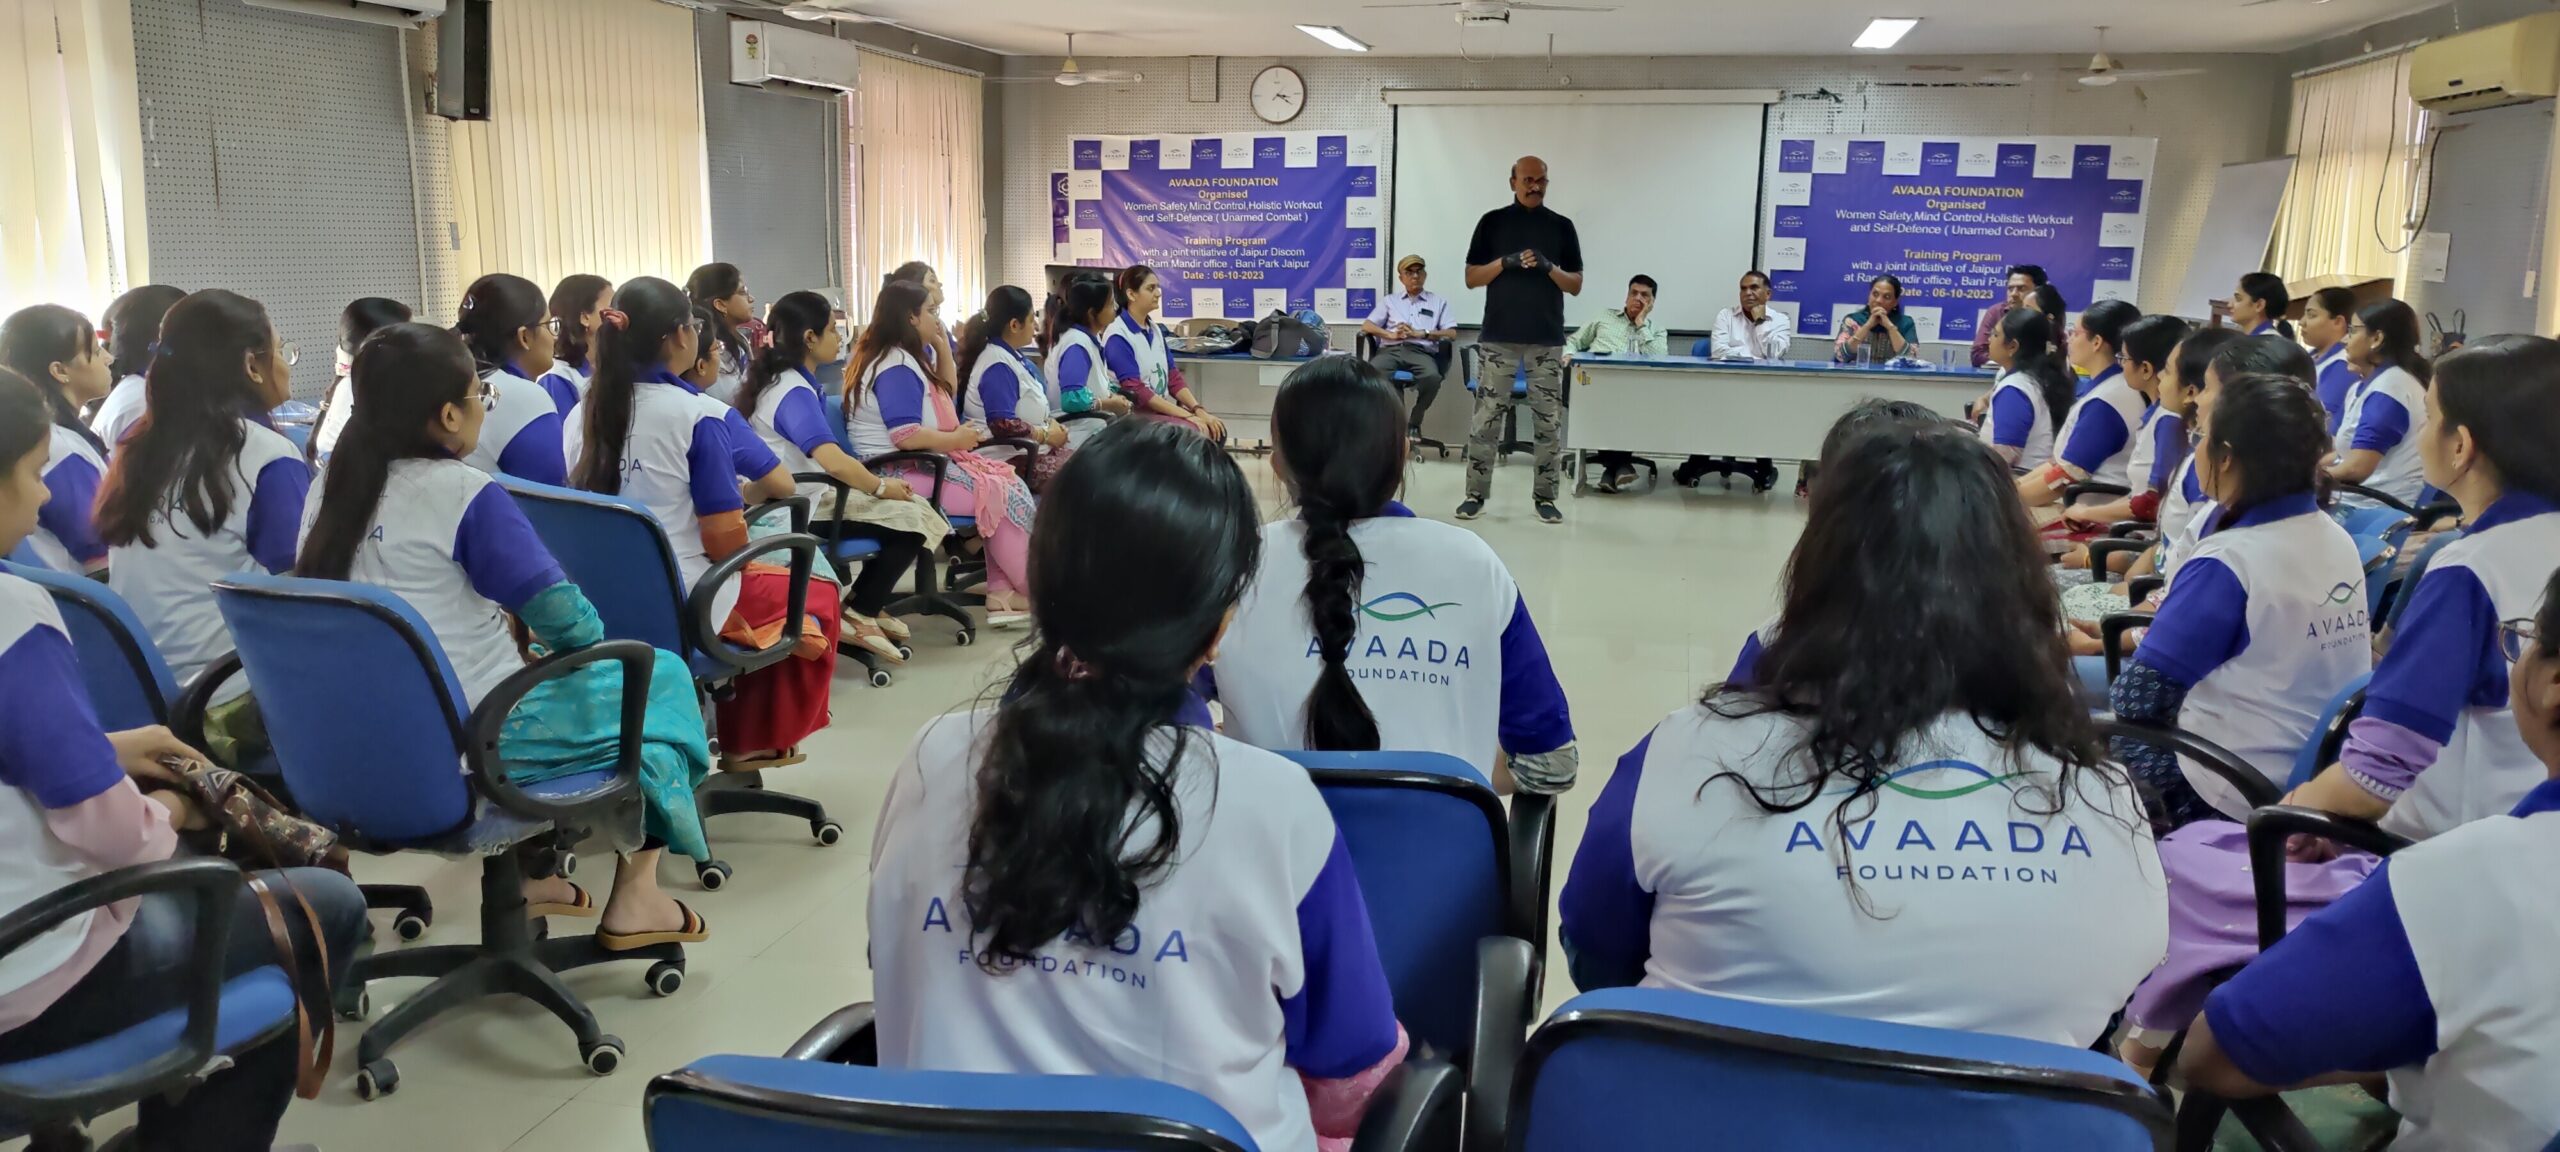 Empowering Women: Avaada Foundation’s Self-Defence Workshop a Resounding Success